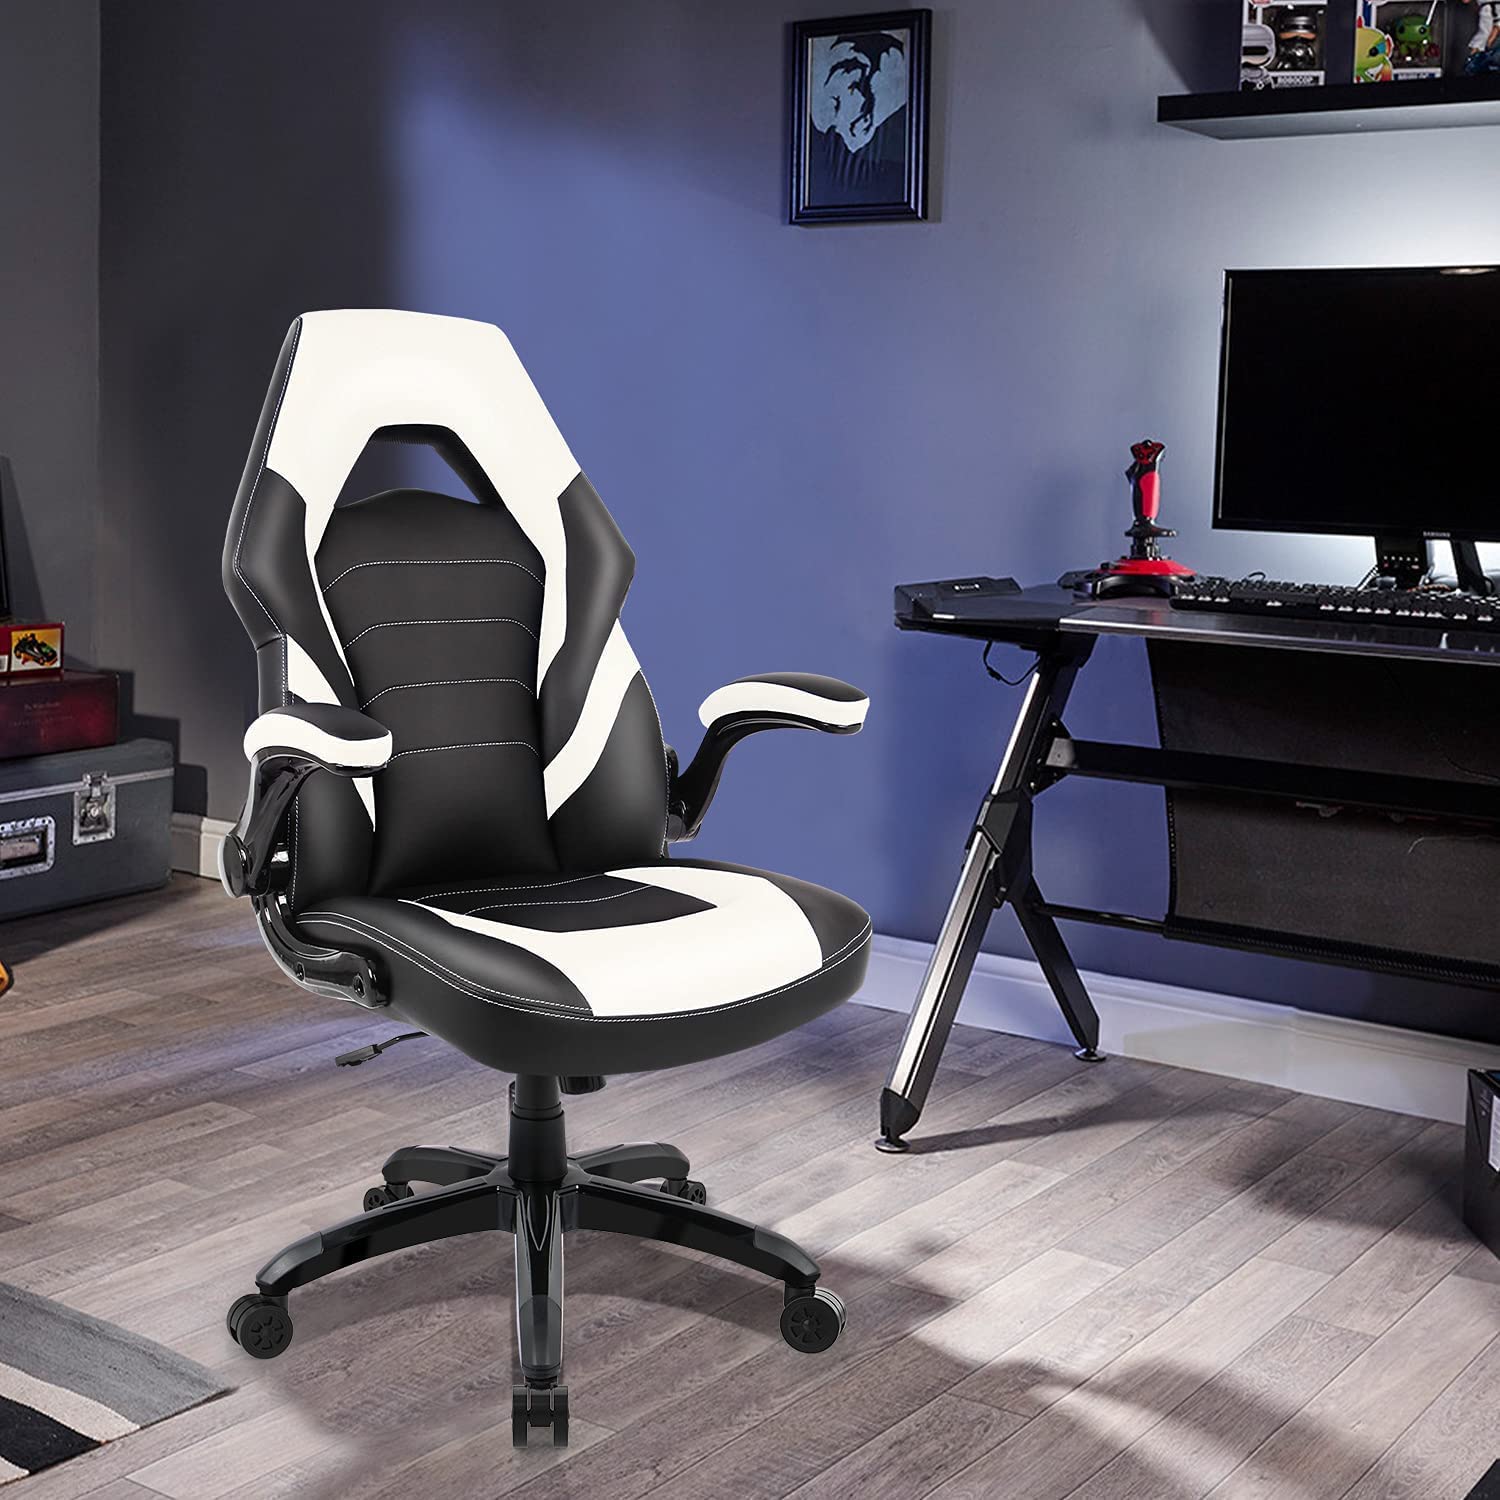 Ergonomic Computer Desk Chairs by OLIXIS